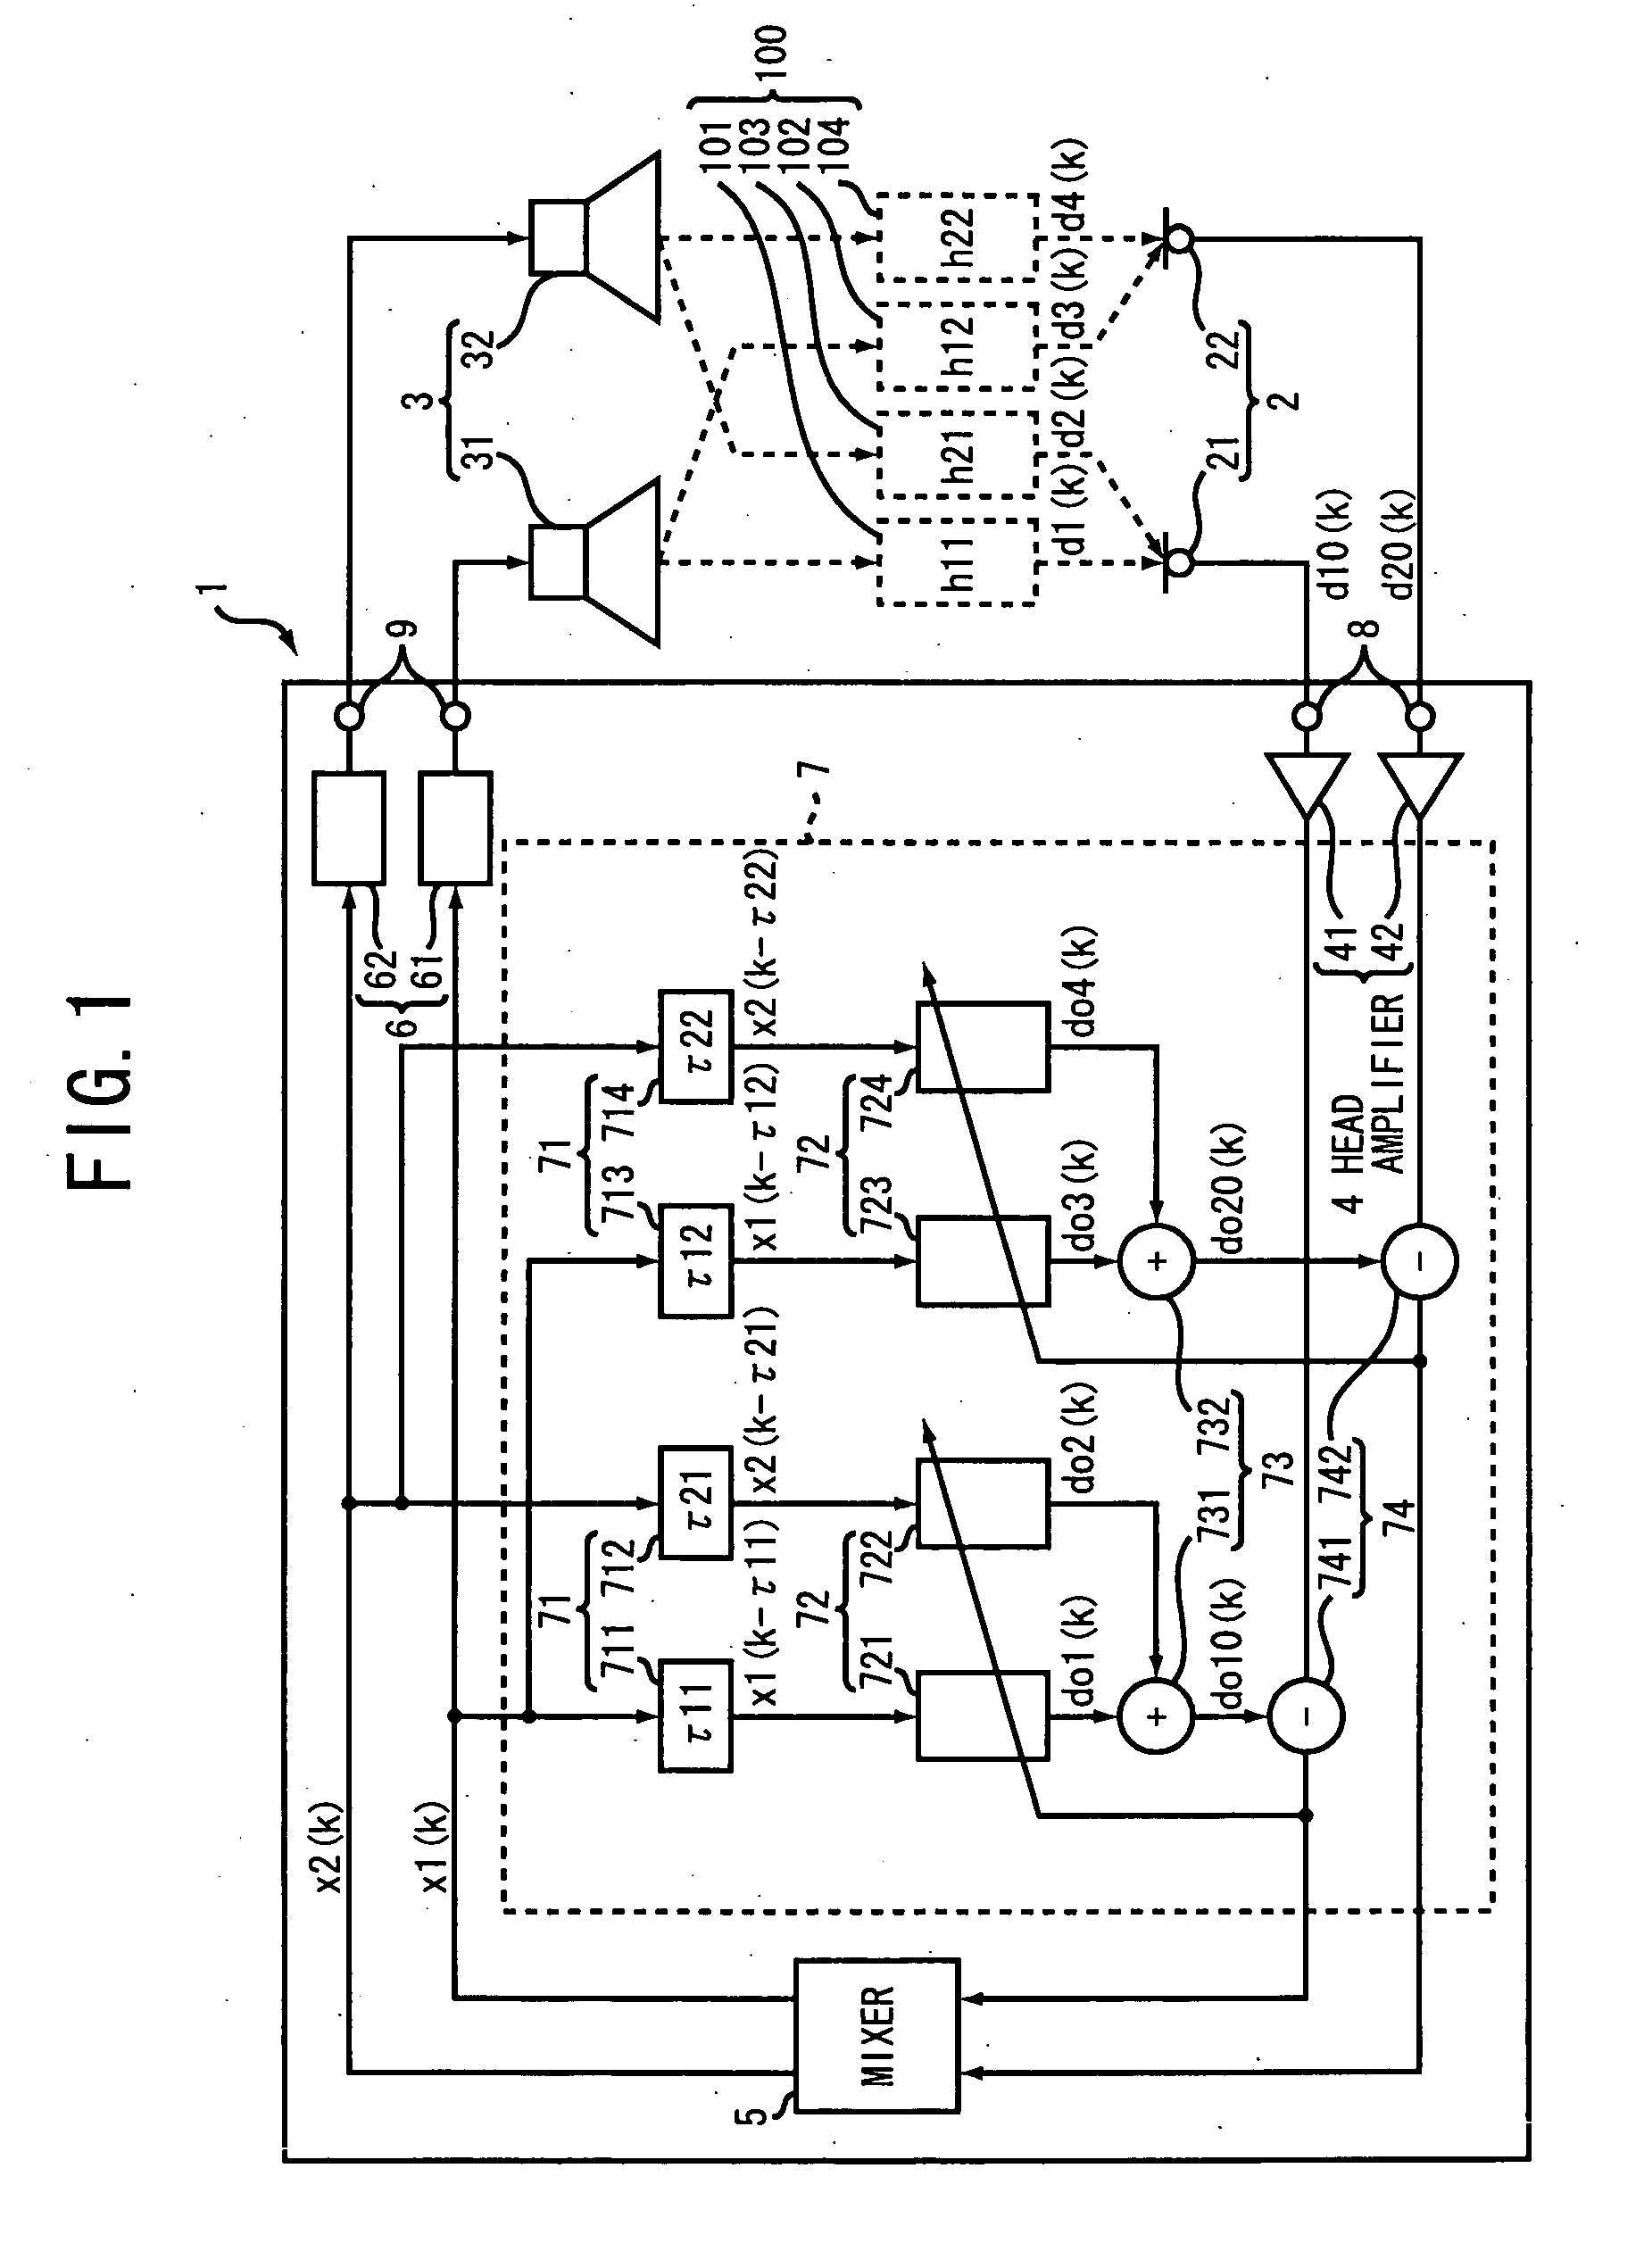 Howling canceler apparatus and sound amplification system